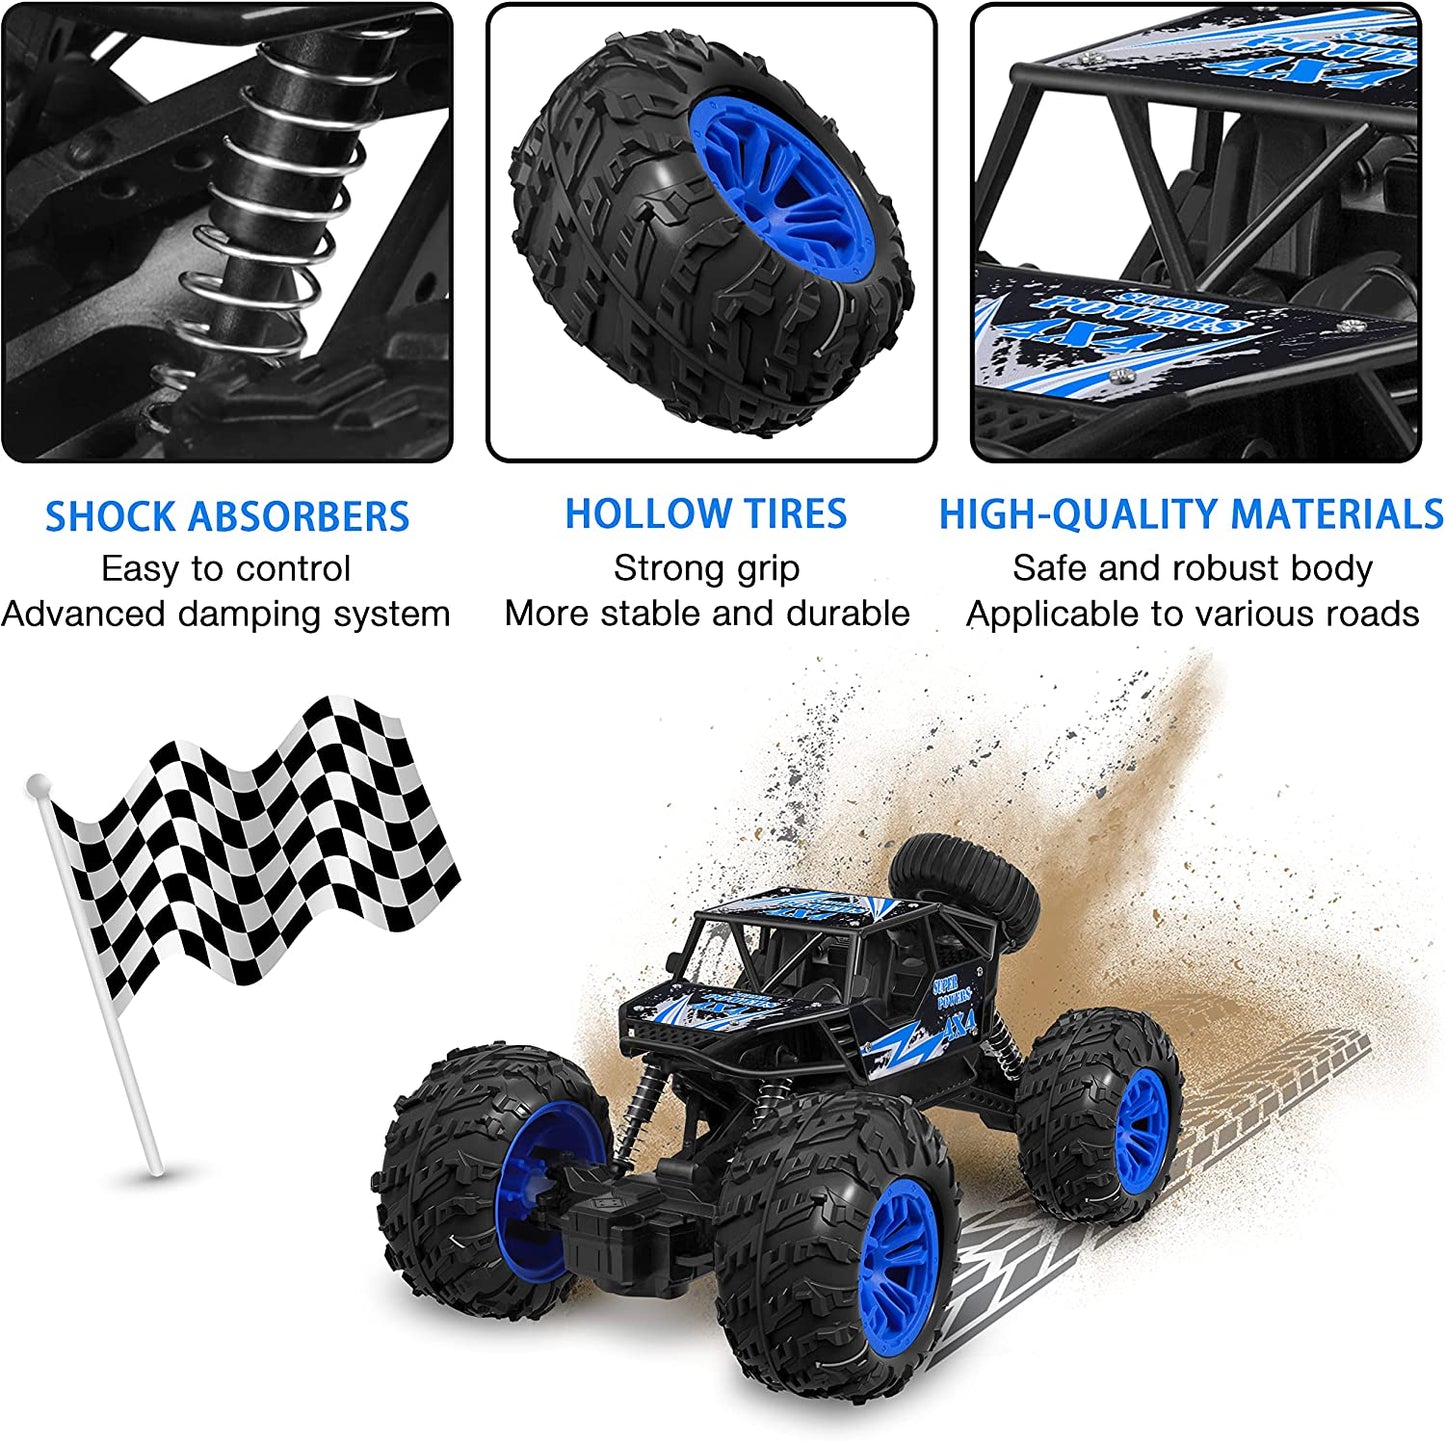 YZ RC Car 1:18 Large Scale, 2.4Ghz All Terrain Waterproof Remote Control Truck with 2 Batteries,4X4 Electric Rapidly off Road Car For, Remote Control Car